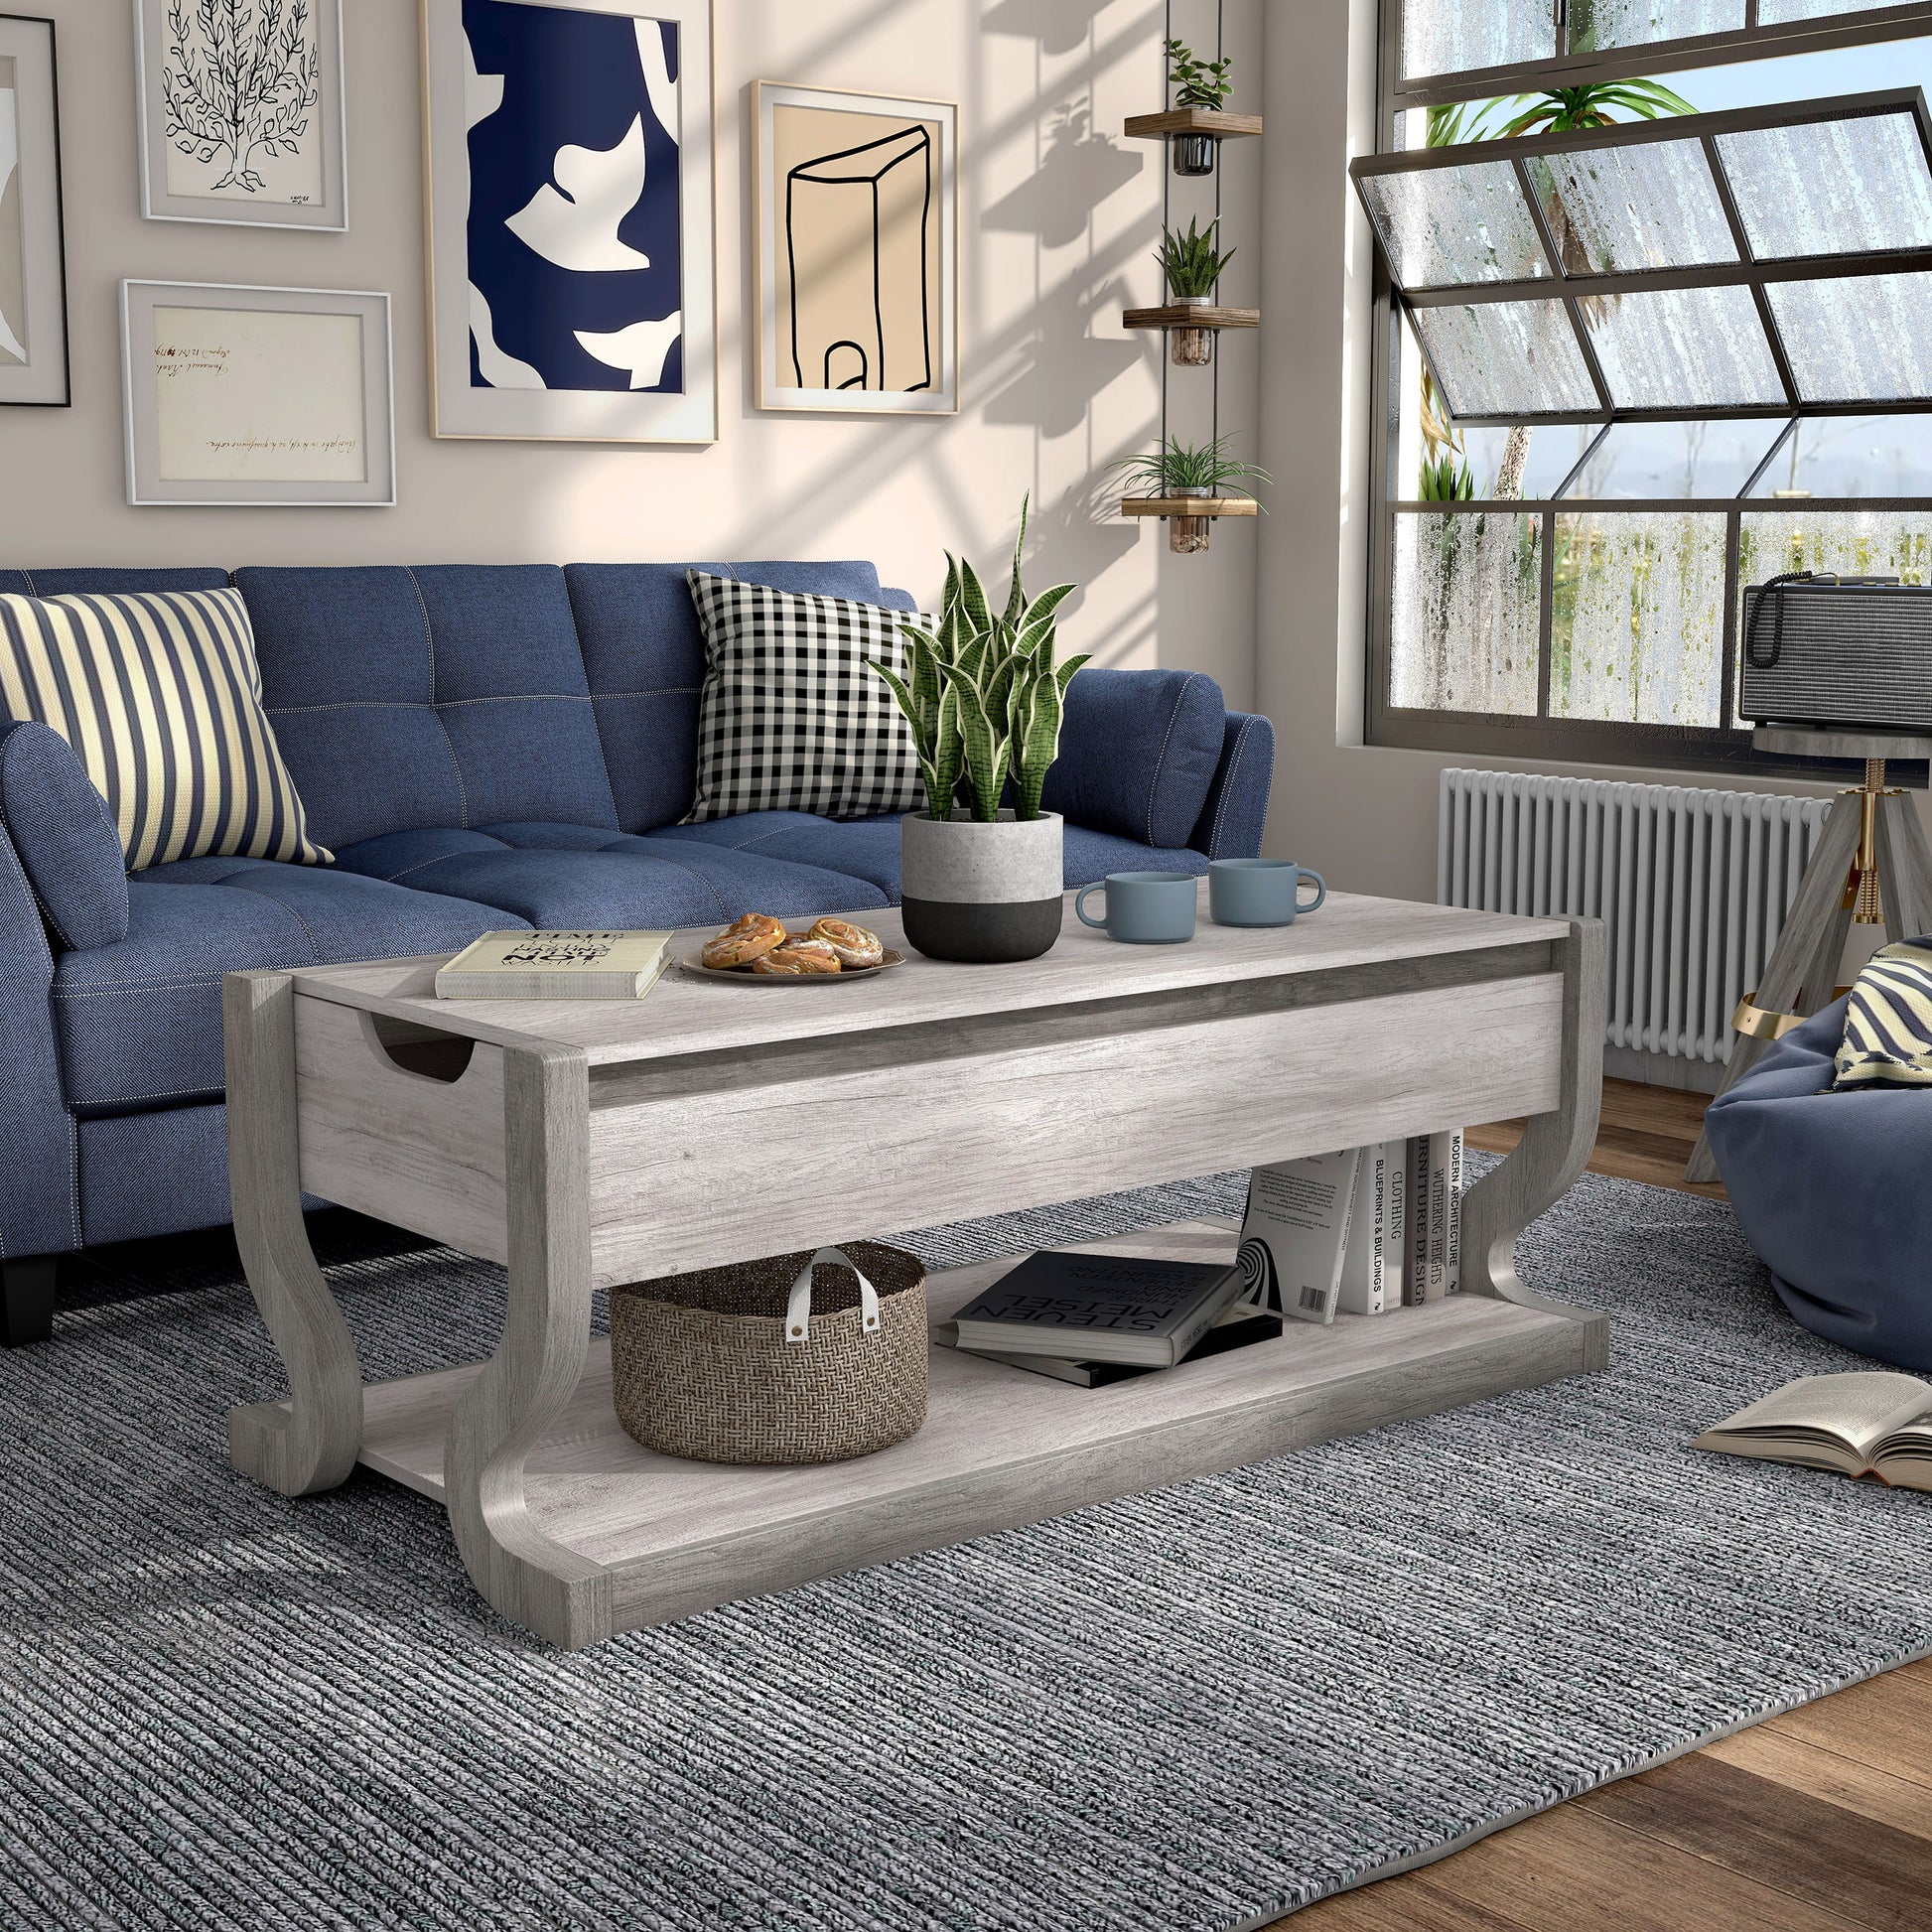 Right angled transitional coastal white lift-top coffee table with storage in a living room with accessories